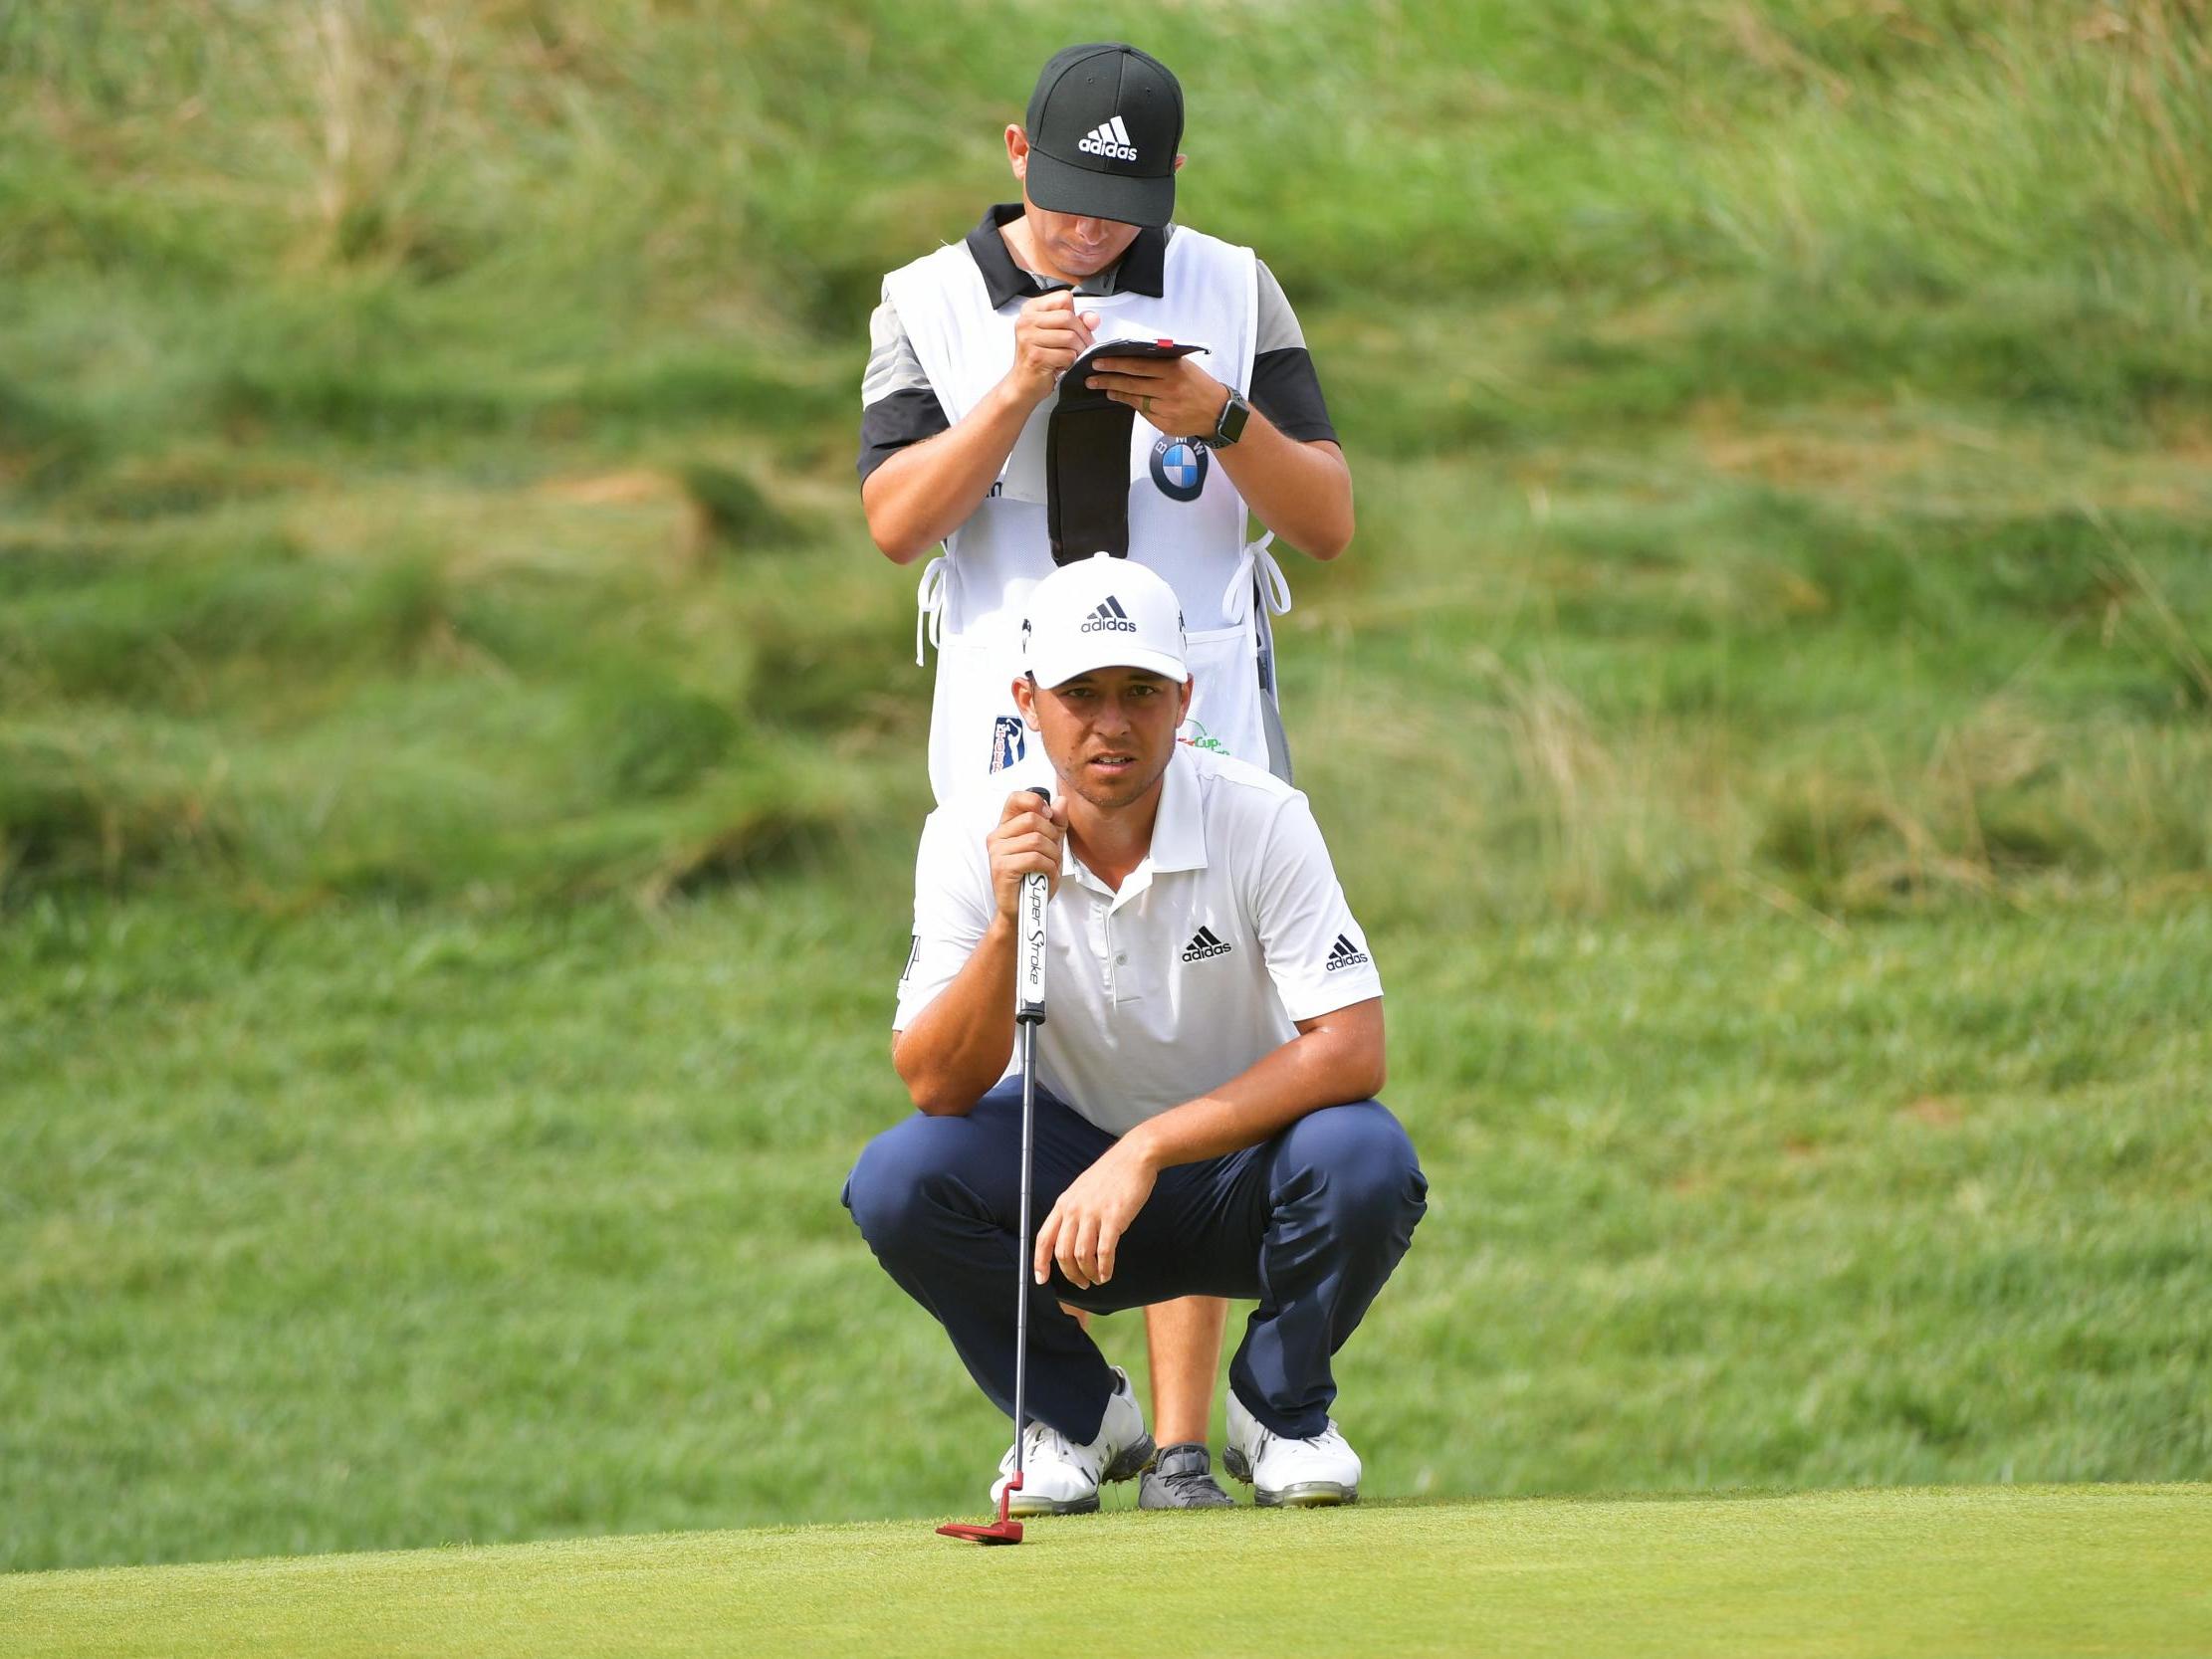 Schauffele leads heading into the weekend at Aronimink